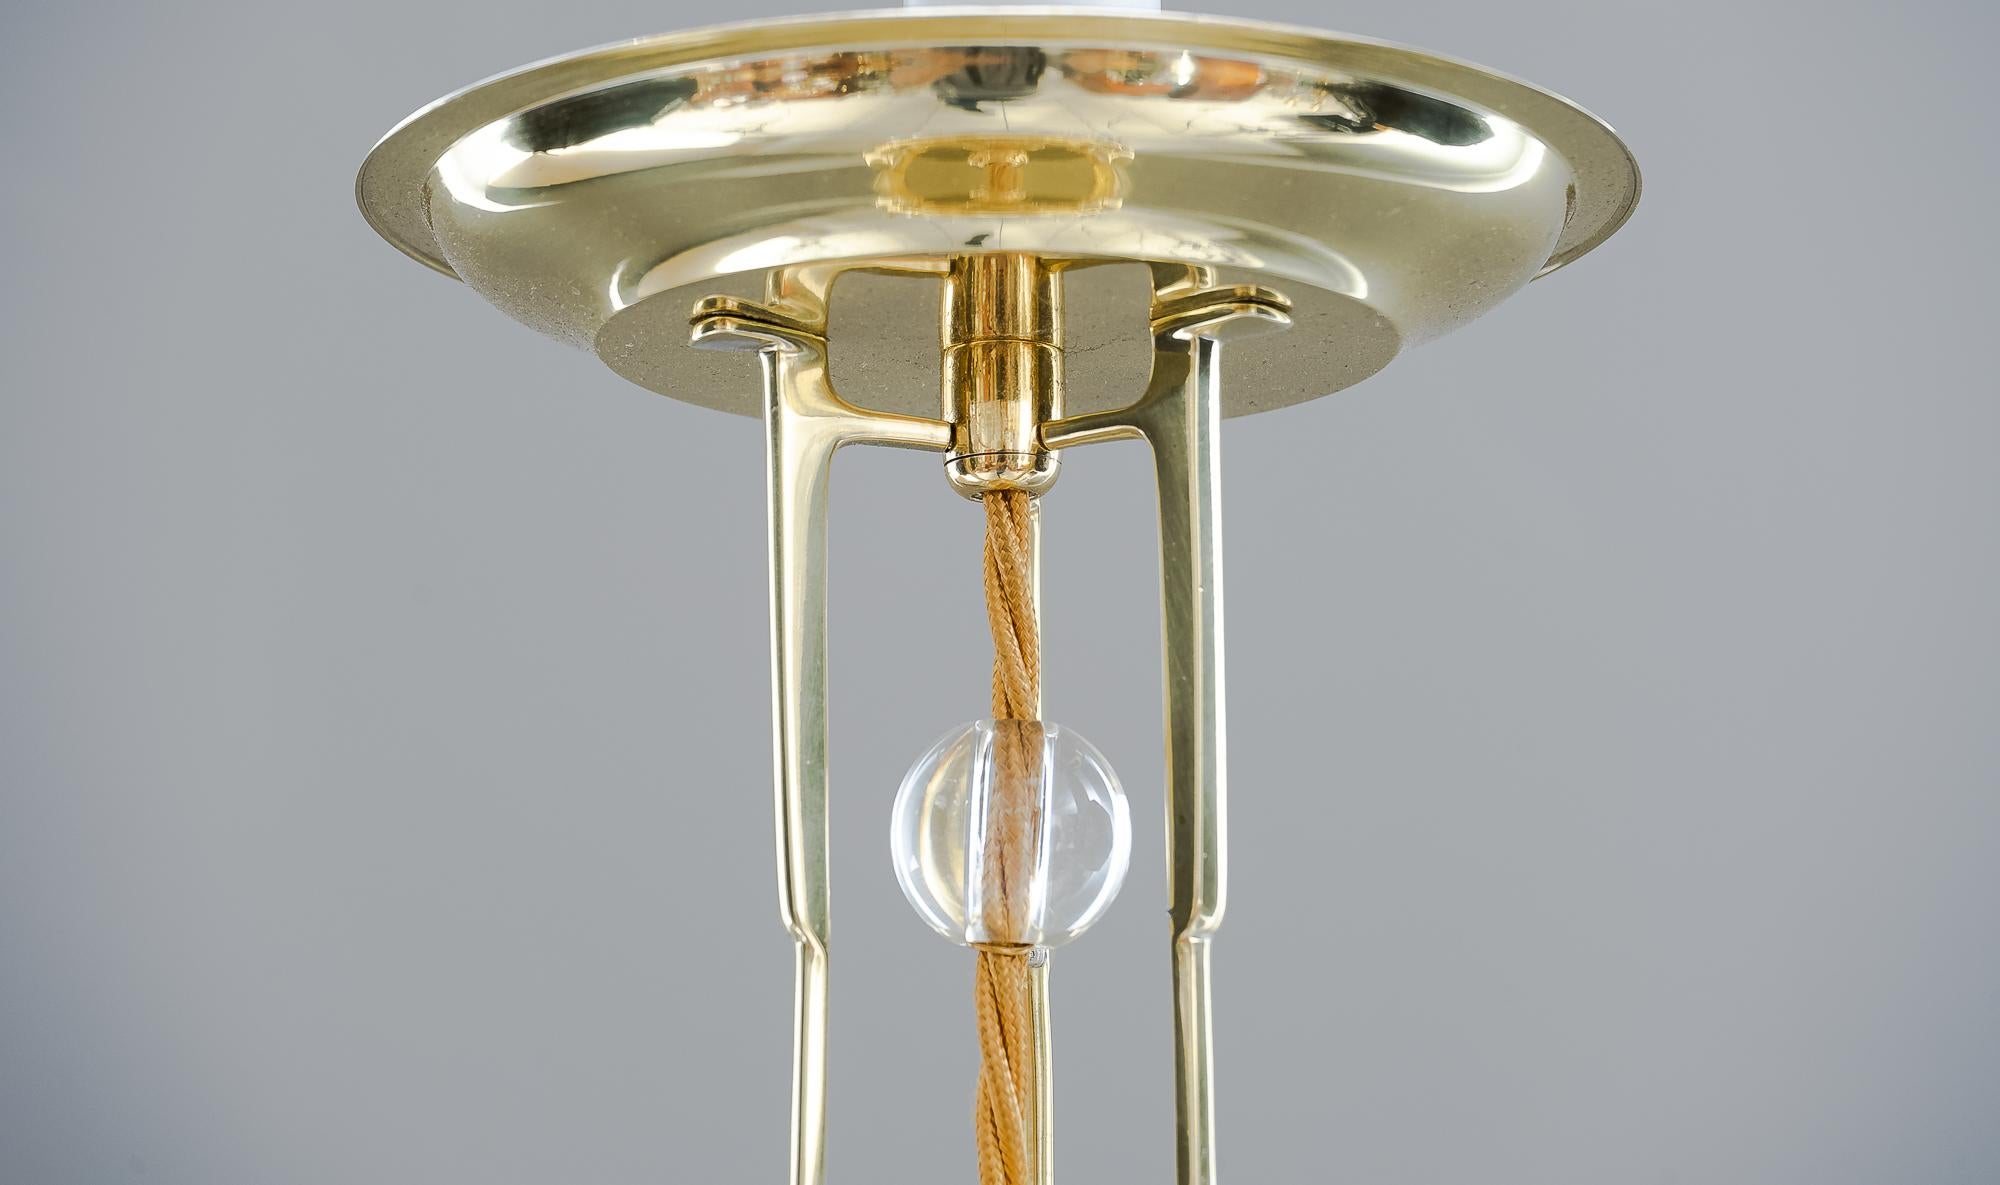 Lacquered Art Deco Ceiling Lamp with Original Glass Shade, Vienna, circa 1920s